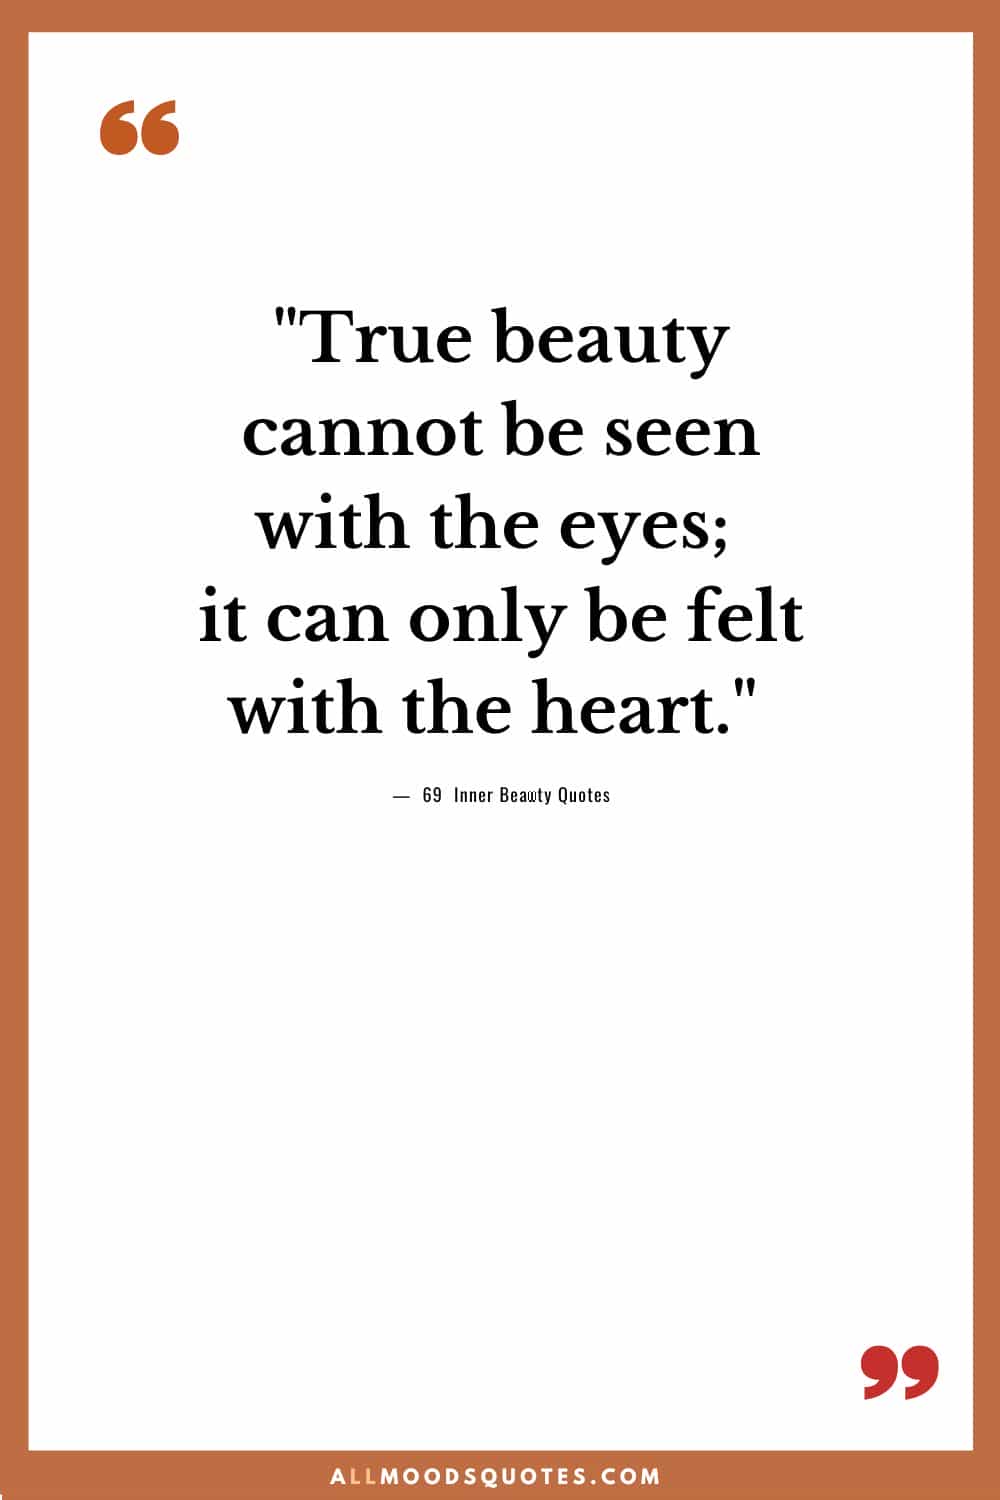 True beauty cannot be seen with the eyes; it can only be felt with the heart.